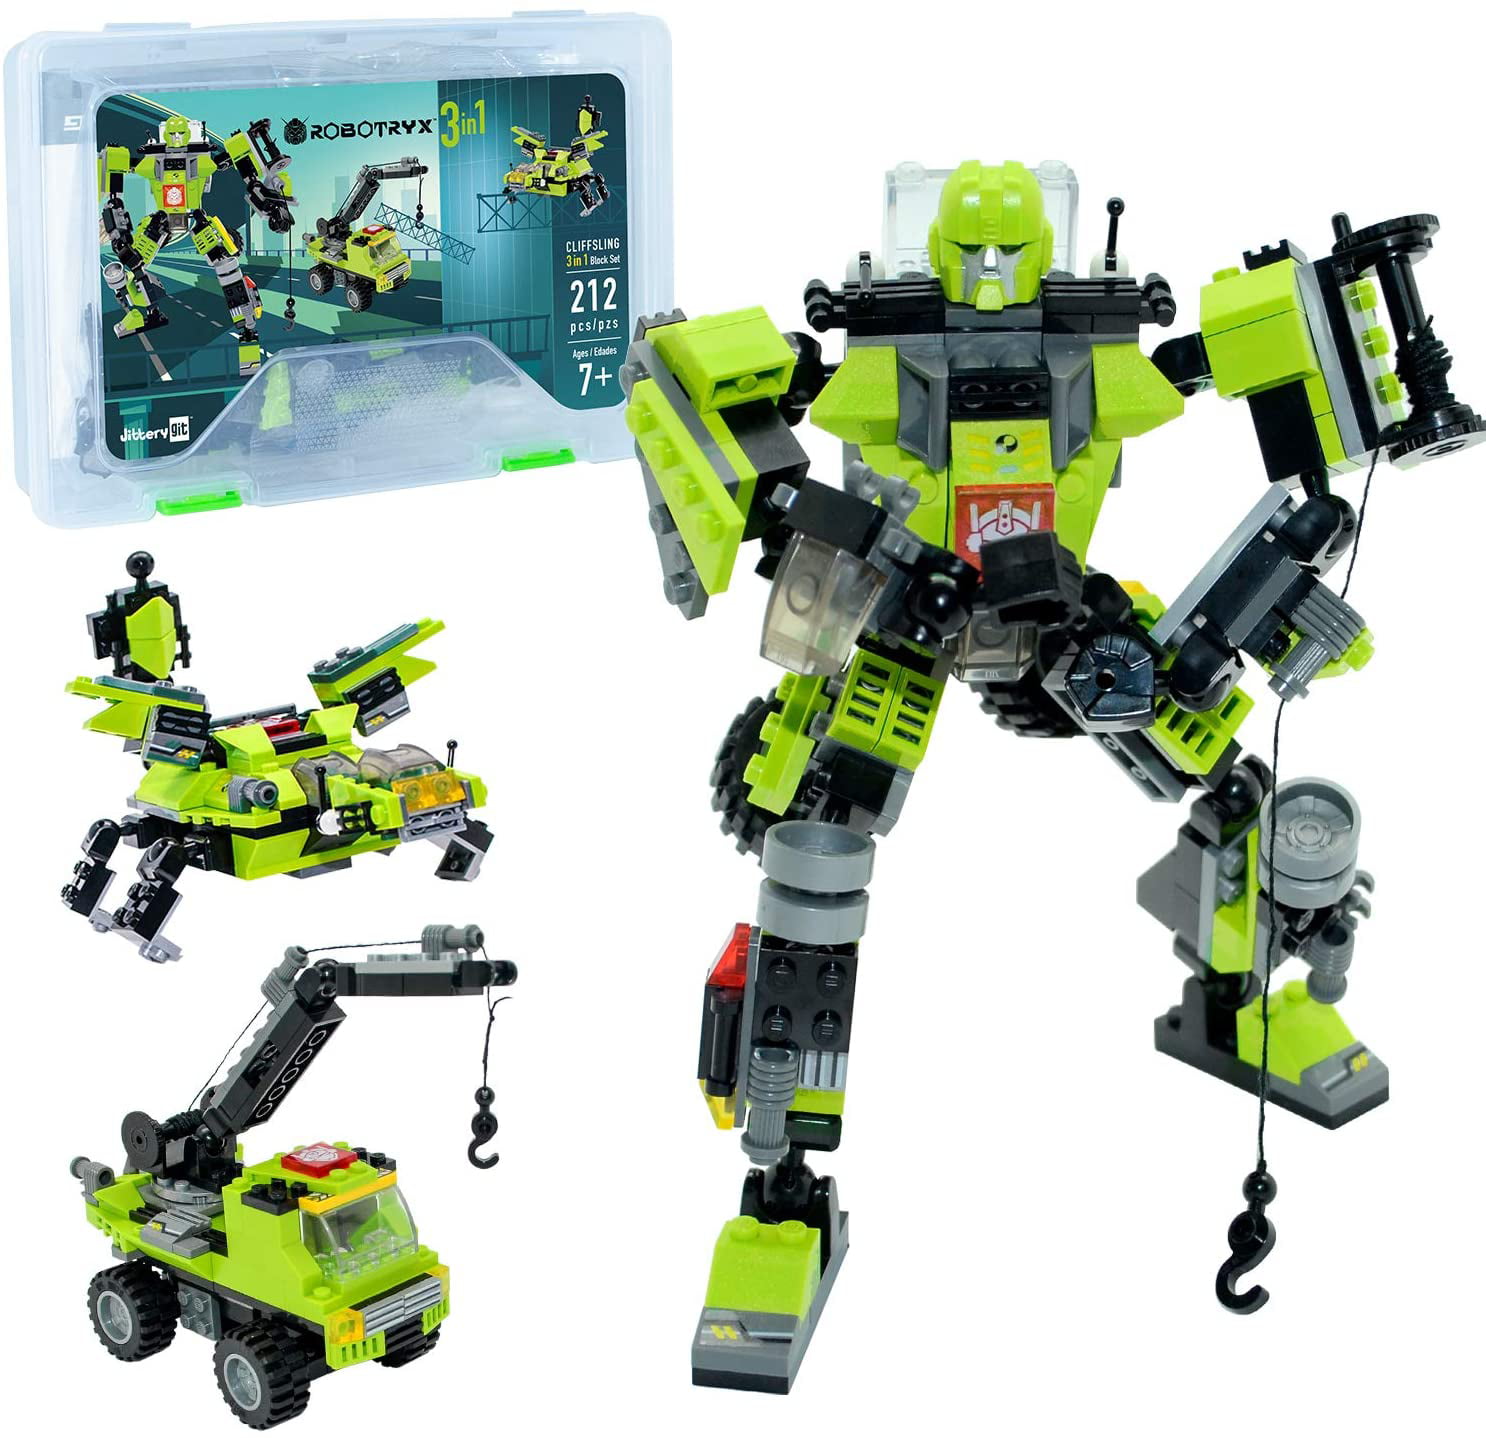 Robot STEM Toy3 In 1 Fun Creative SetConstruction Building Toys For Boys 